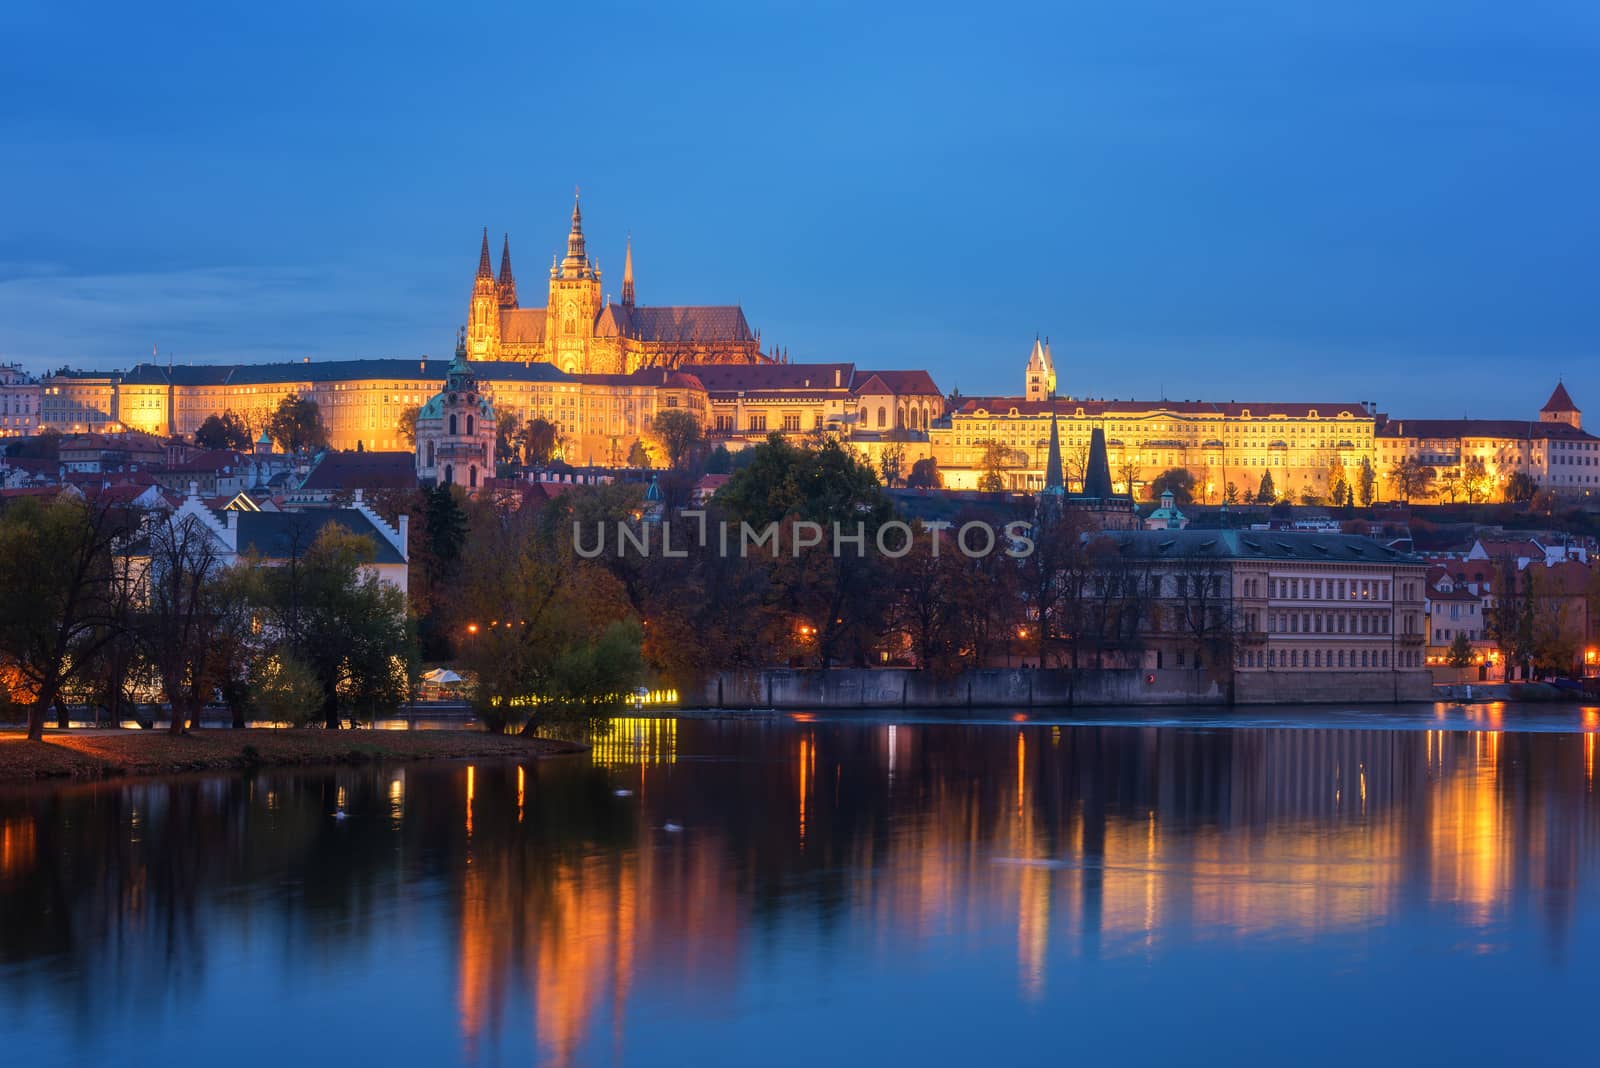 Prague, view of illuminated Prague castle (Prazsky Hrad) with reflection in the water, night scenic cityscape, Czech Republic by LaraUhryn